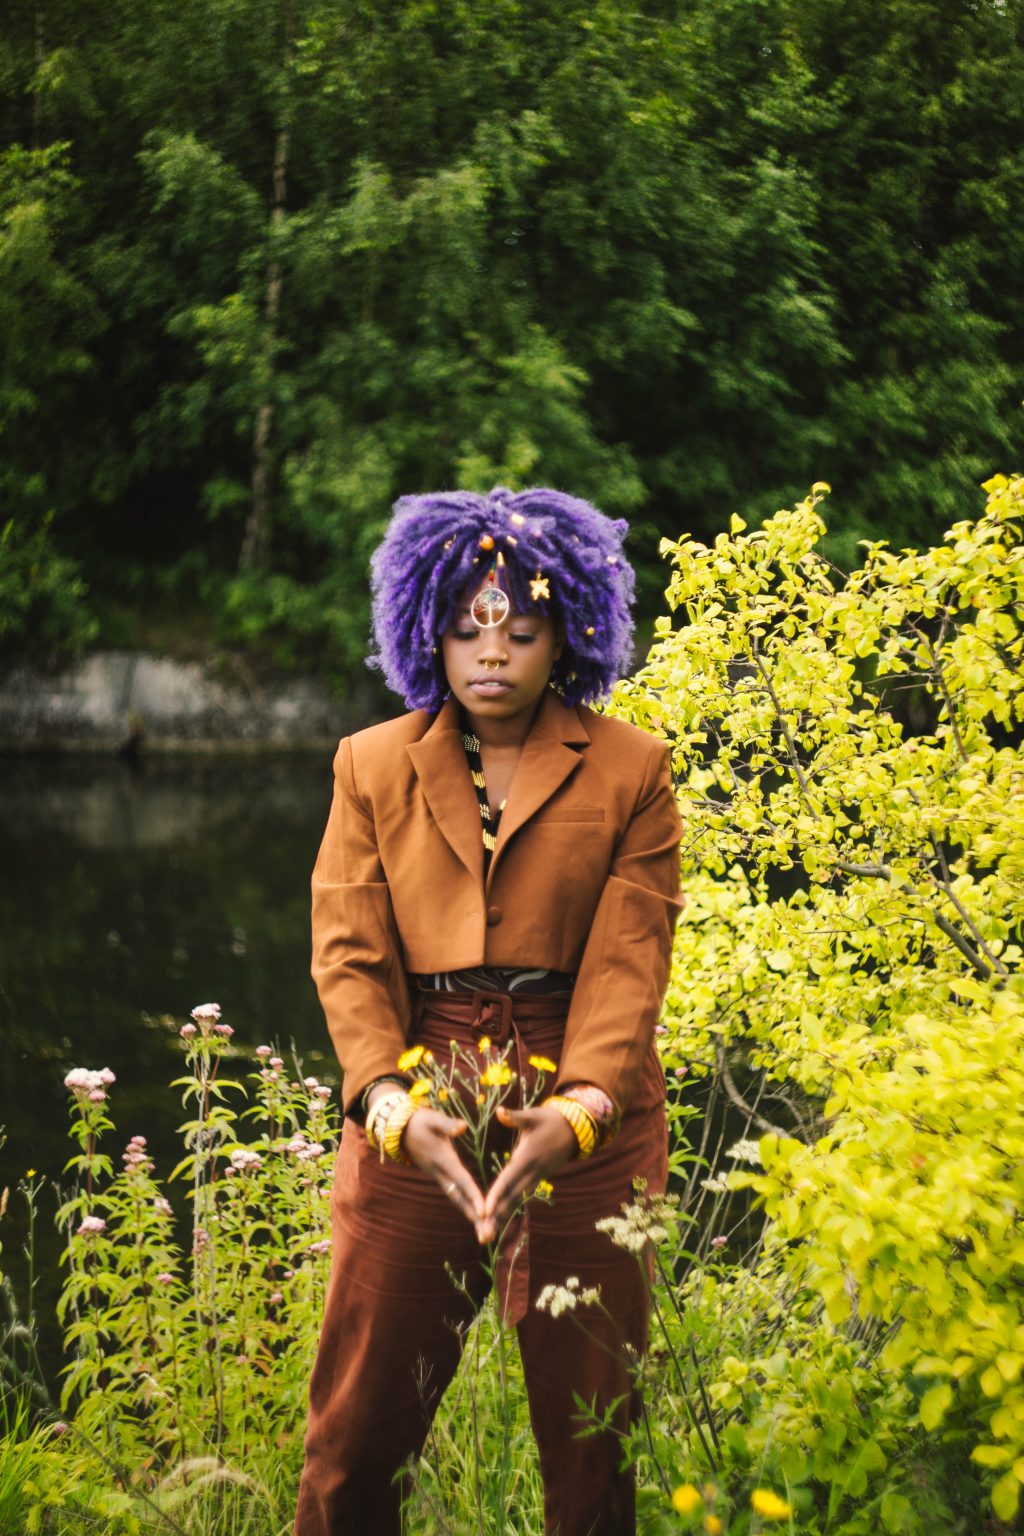 Eyve poses for a phot outdoors. There is a lake and tall trees in the background. Eyvehas a purple afro. She is wearing a brown suit and bangles. She has both hands in front of her with her fingers touching, forming an upside down triangle.